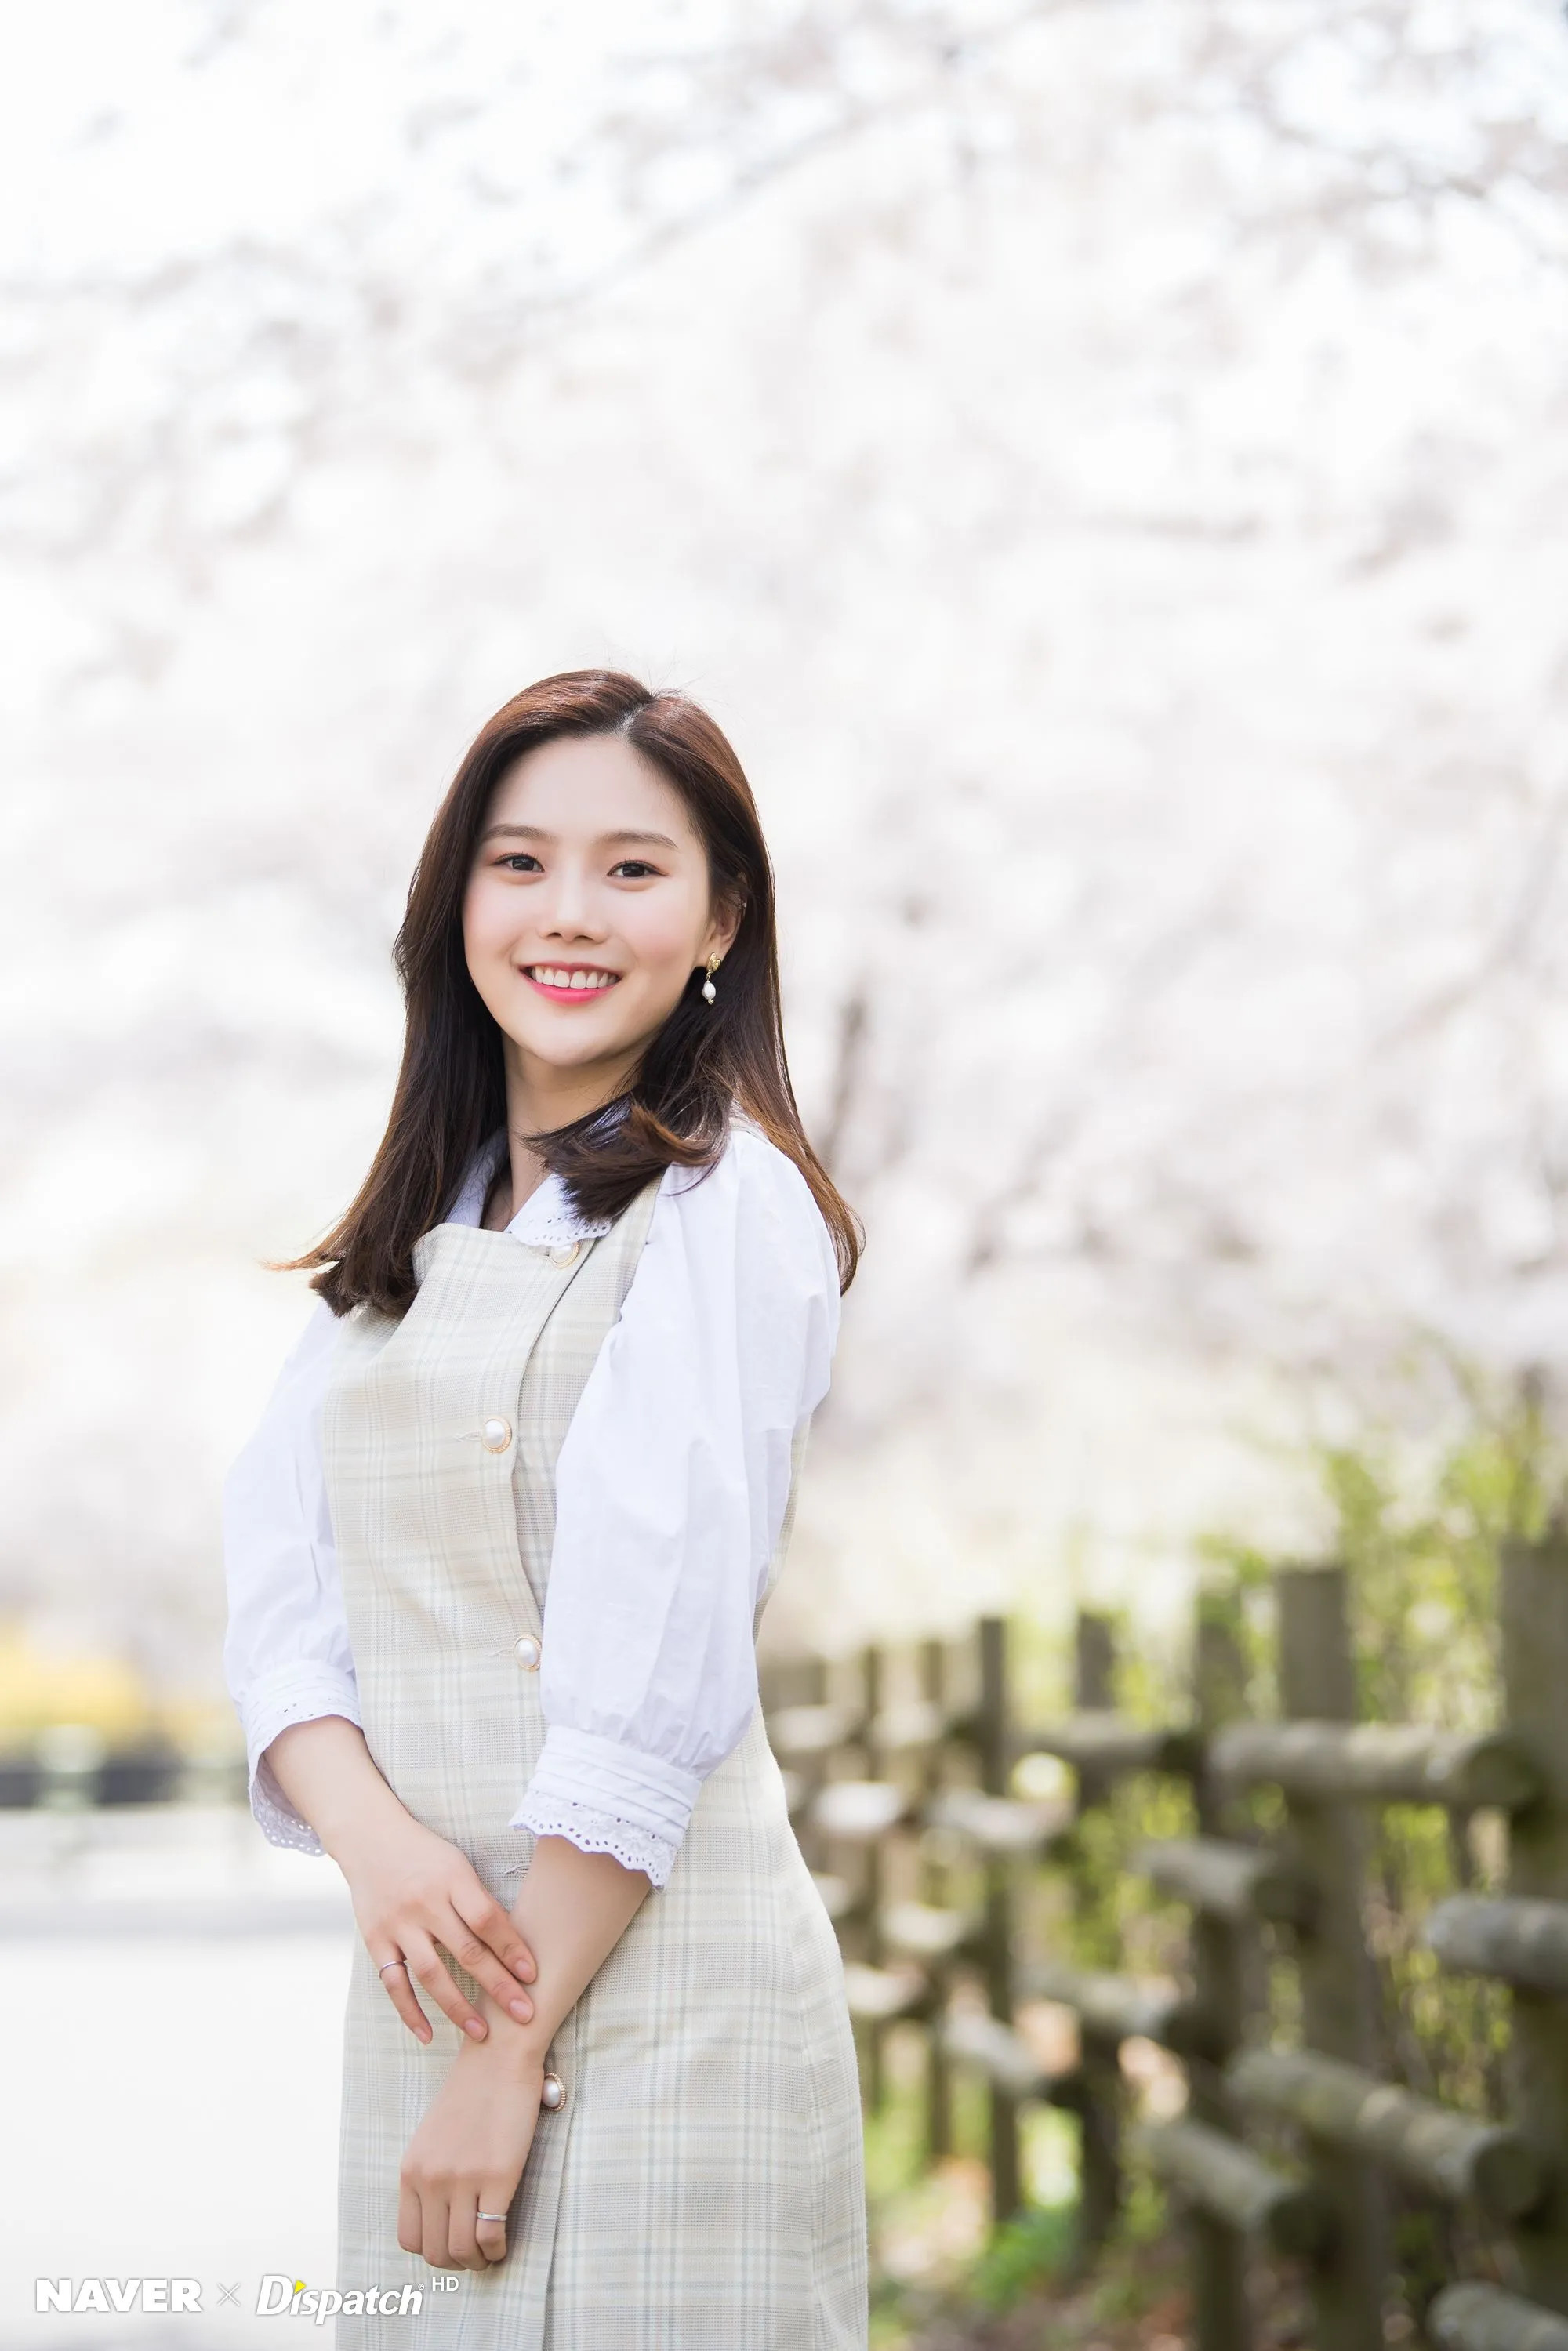 Oh My Girl Hyojung - 'The Fifth Season' promotion photoshoot by Naver x ...